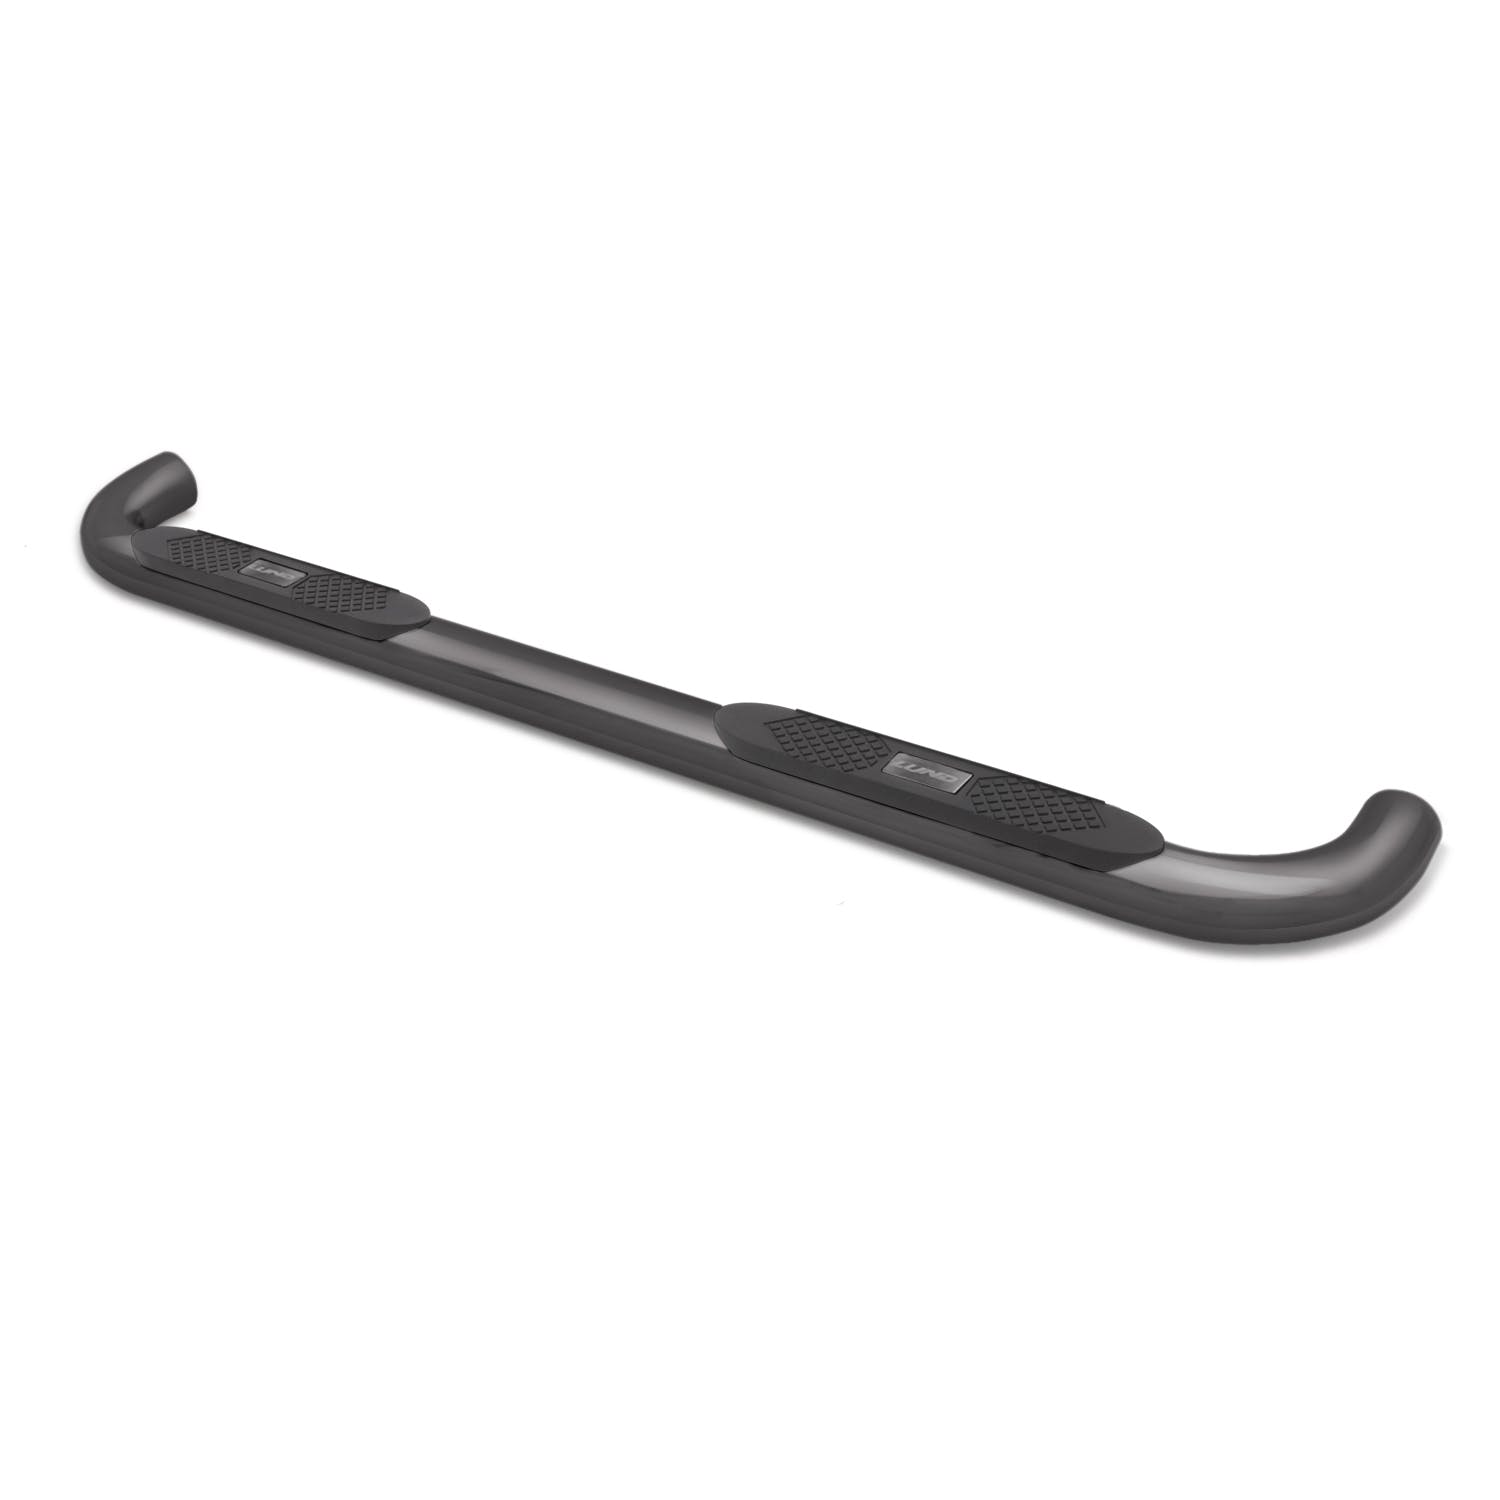 LUND 23440360 4 Inch Oval Curved Nerf Bar - Black 4 In OVAL CURVED STEEL